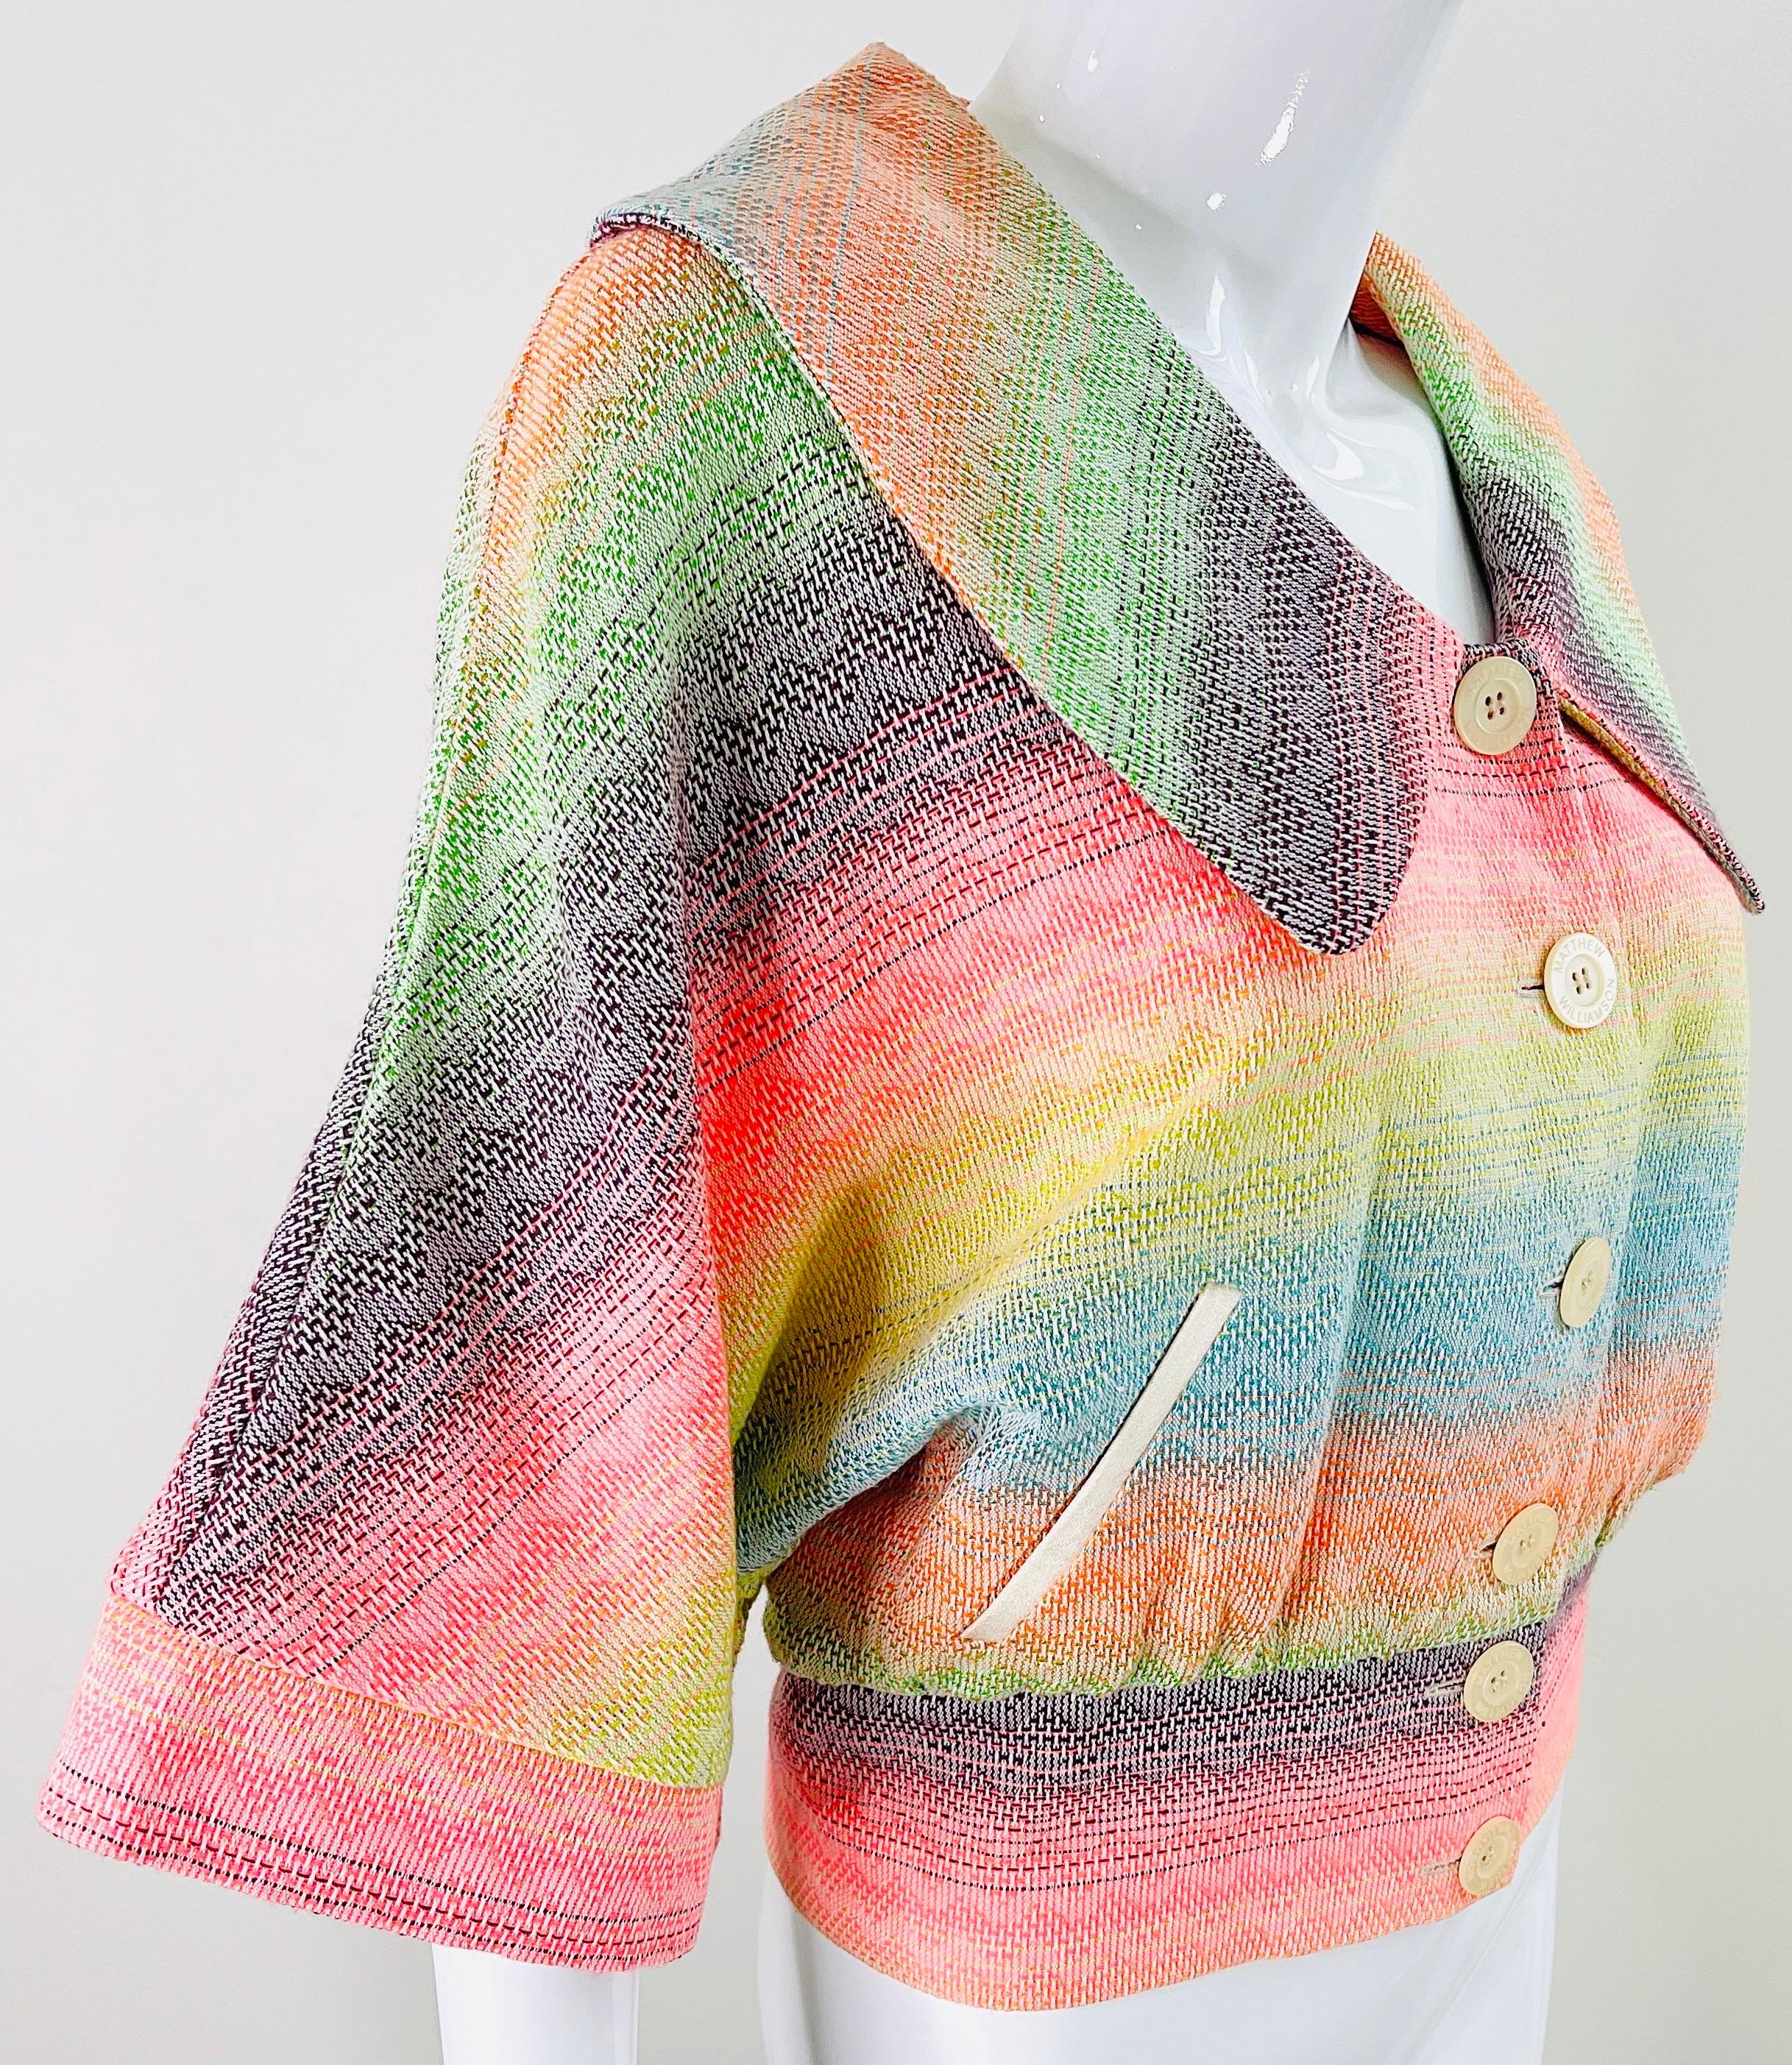 Matthew Williamson Spring 2002 Sz 8 Colorful Rainbow Striped 3/4 Sleeves Jacket  For Sale 2